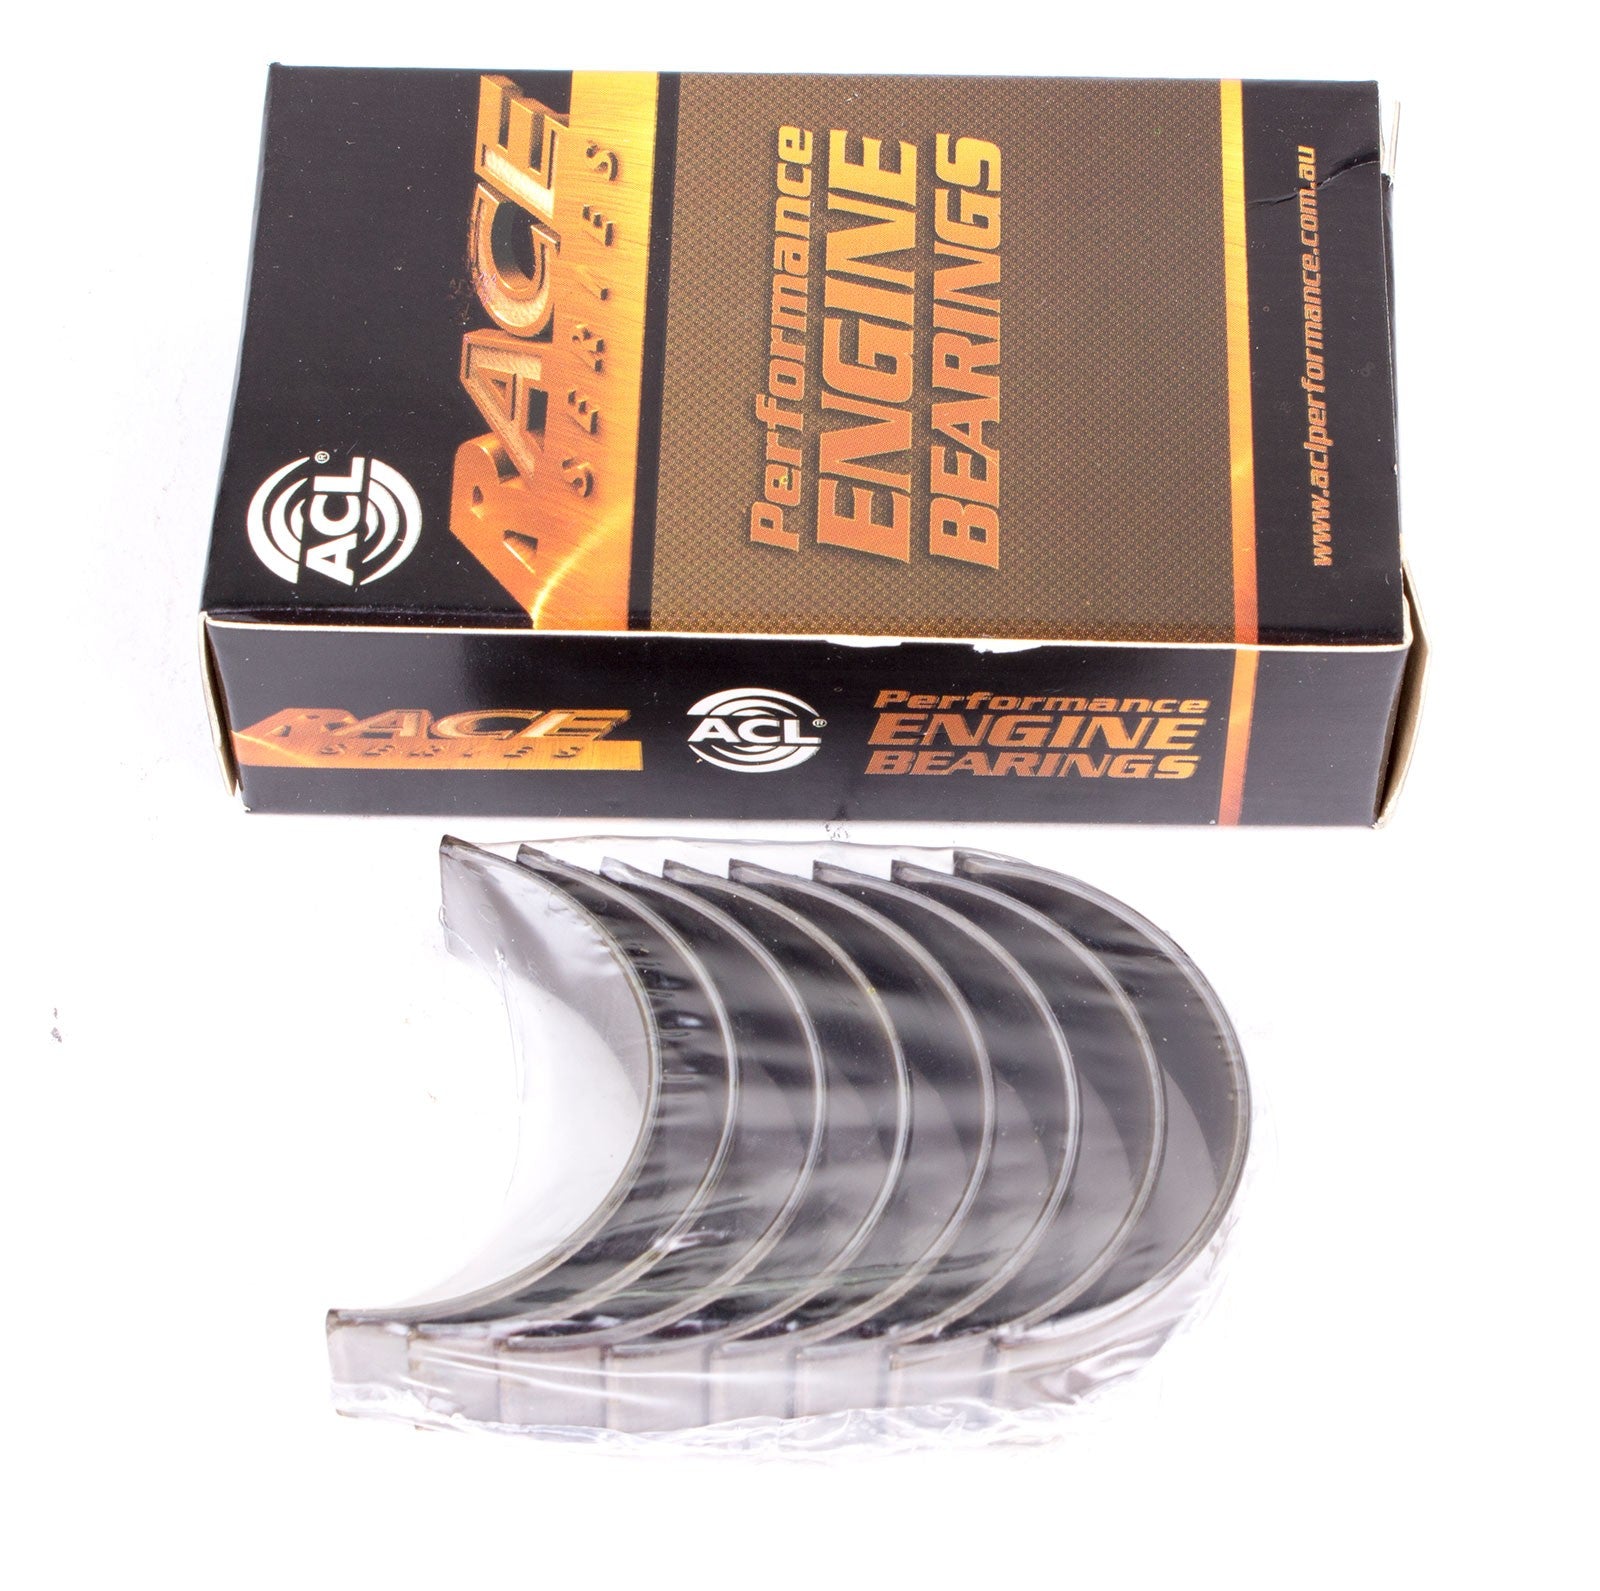 ACL 5M8434H-.25 Main bearing set (ACL Race Series) Photo-0 